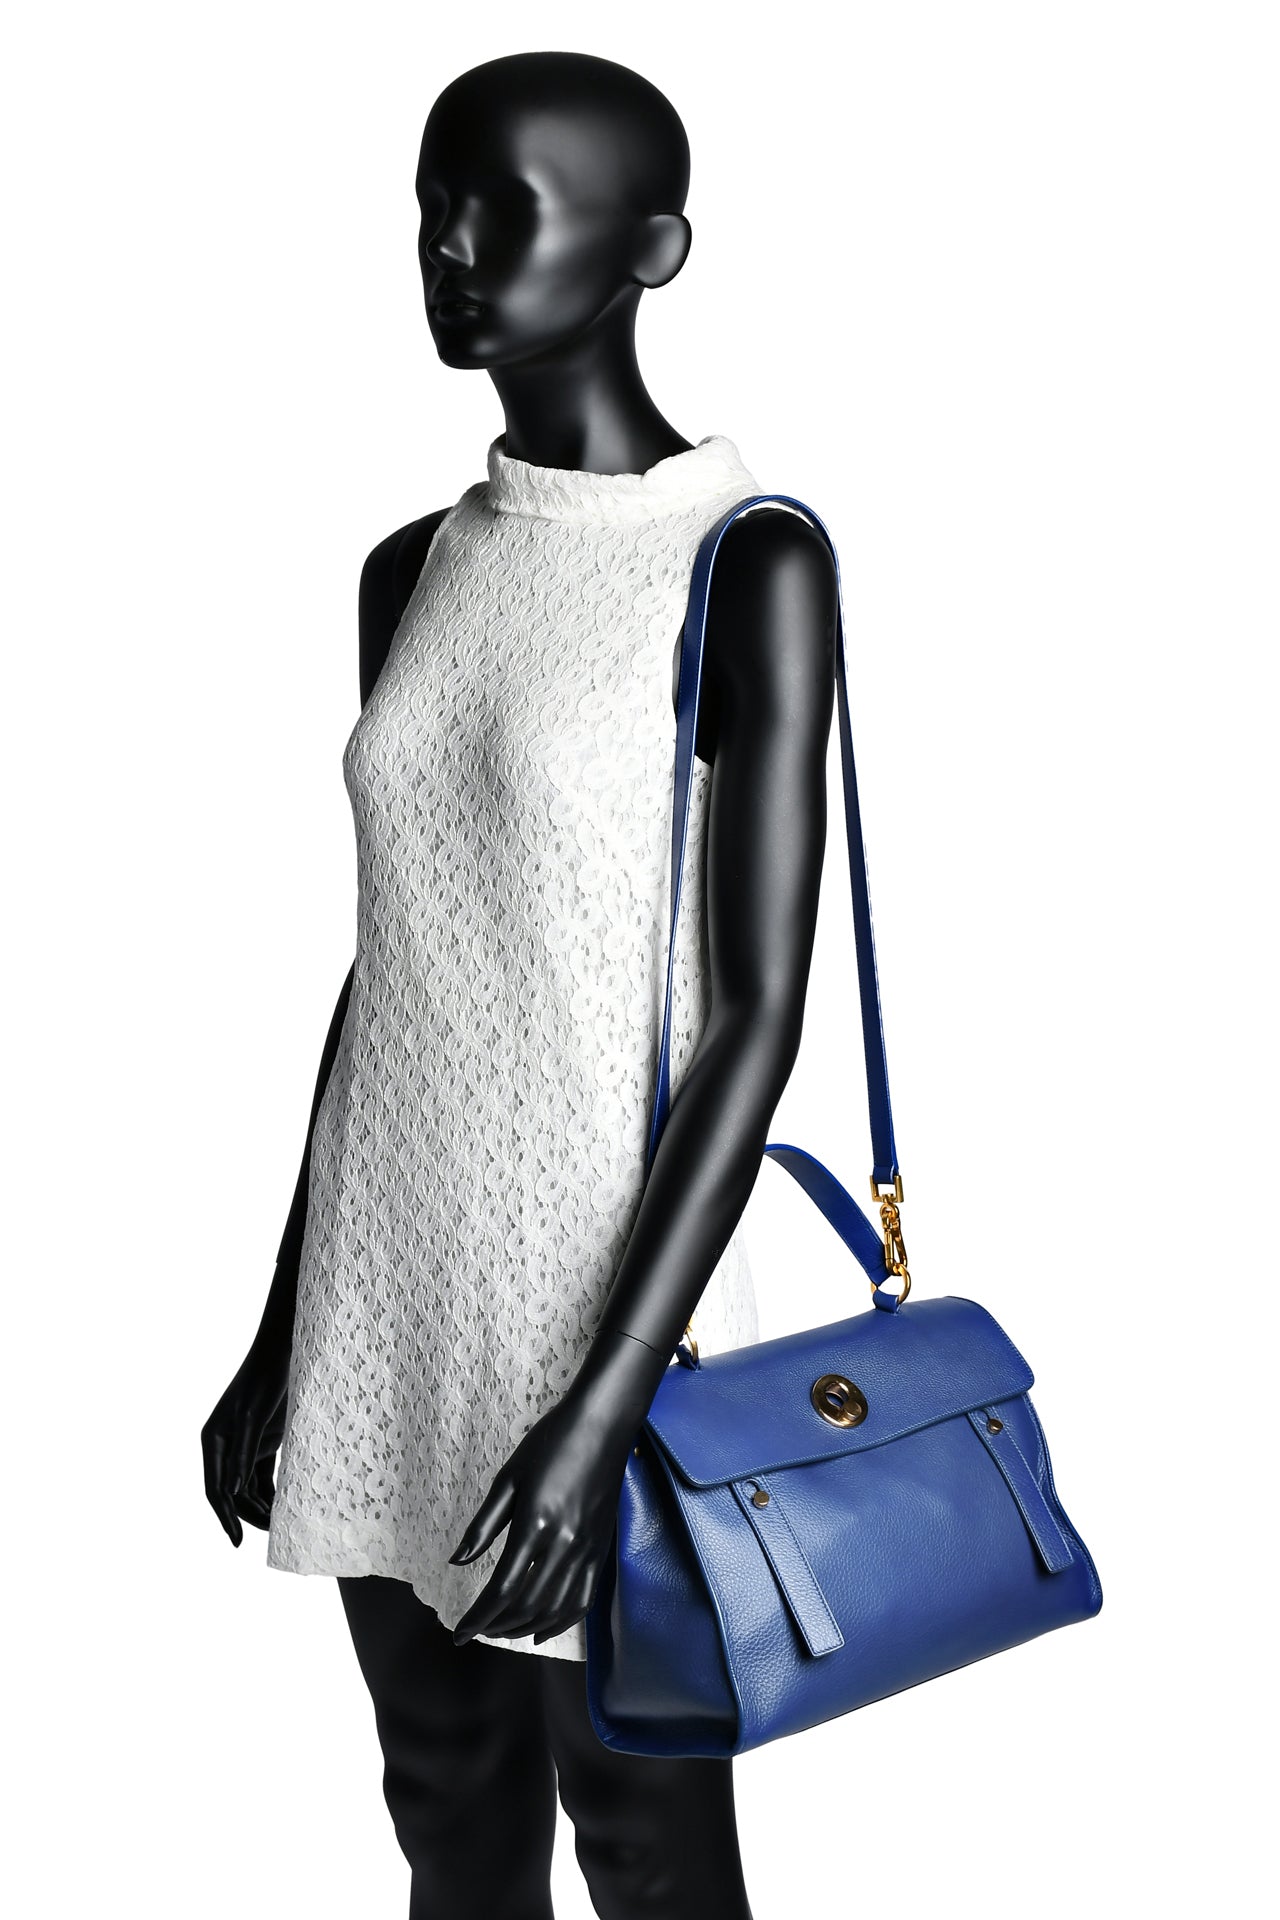 Saint Laurent Blue Leather And Canvas Muse Two Top Handle Bag